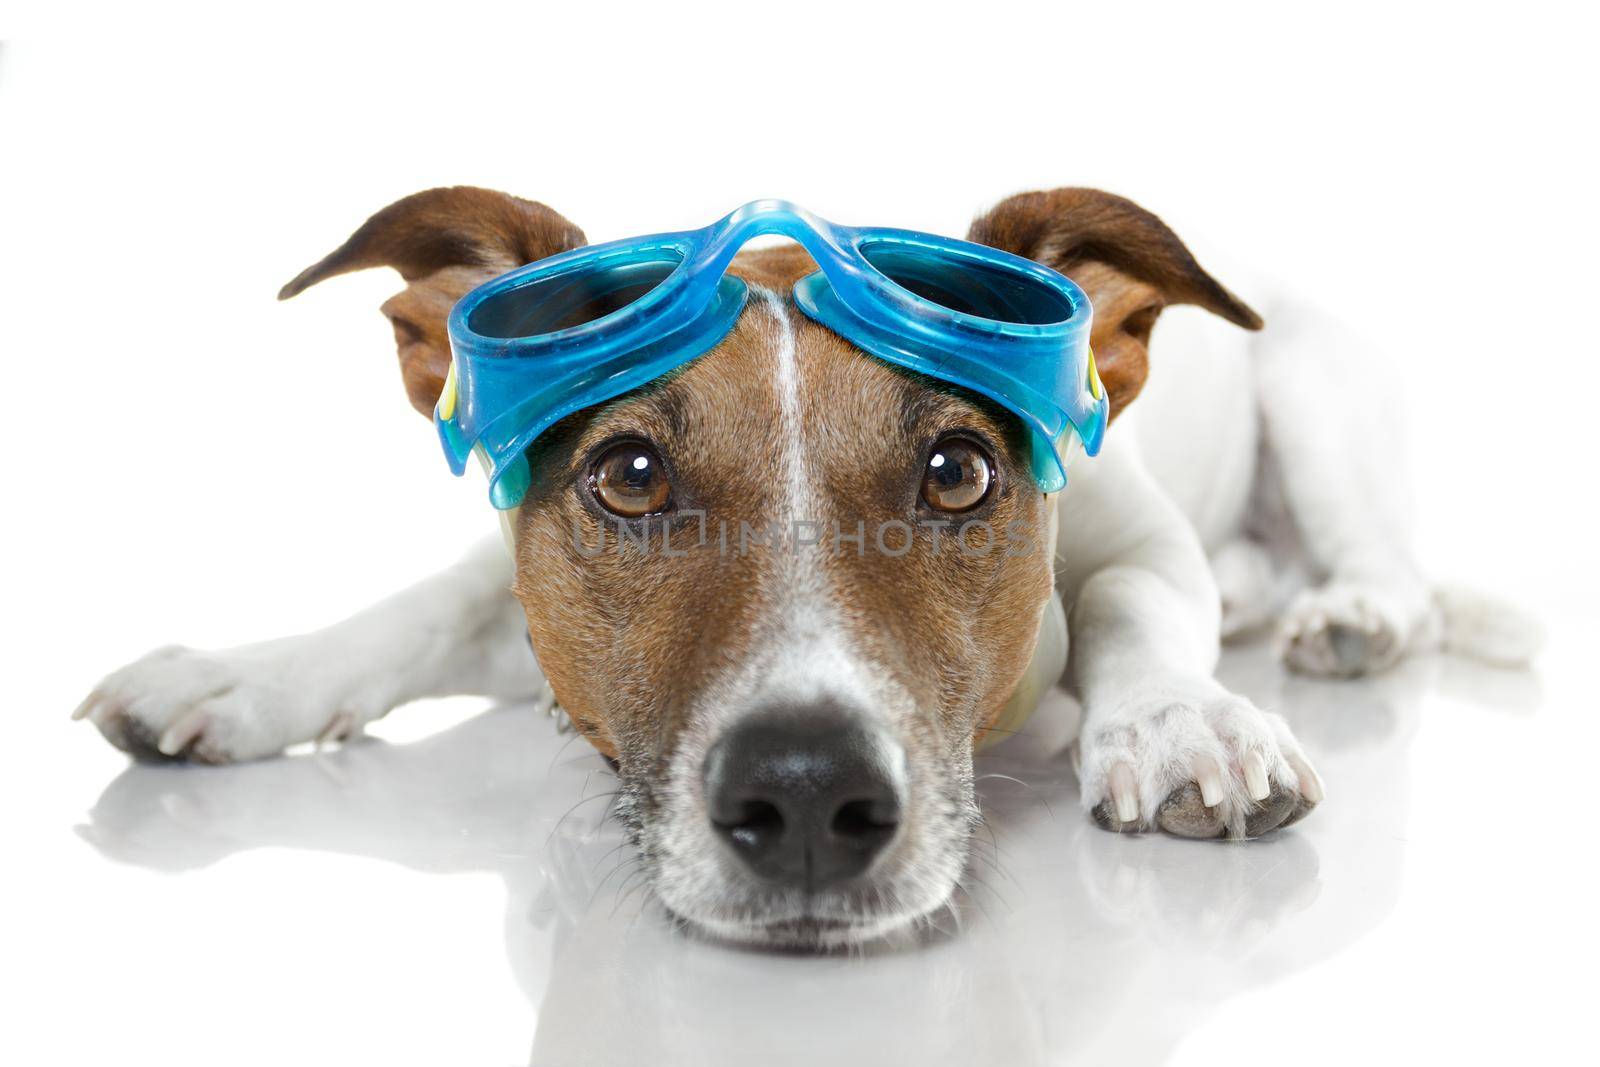 Dog with blue goggles